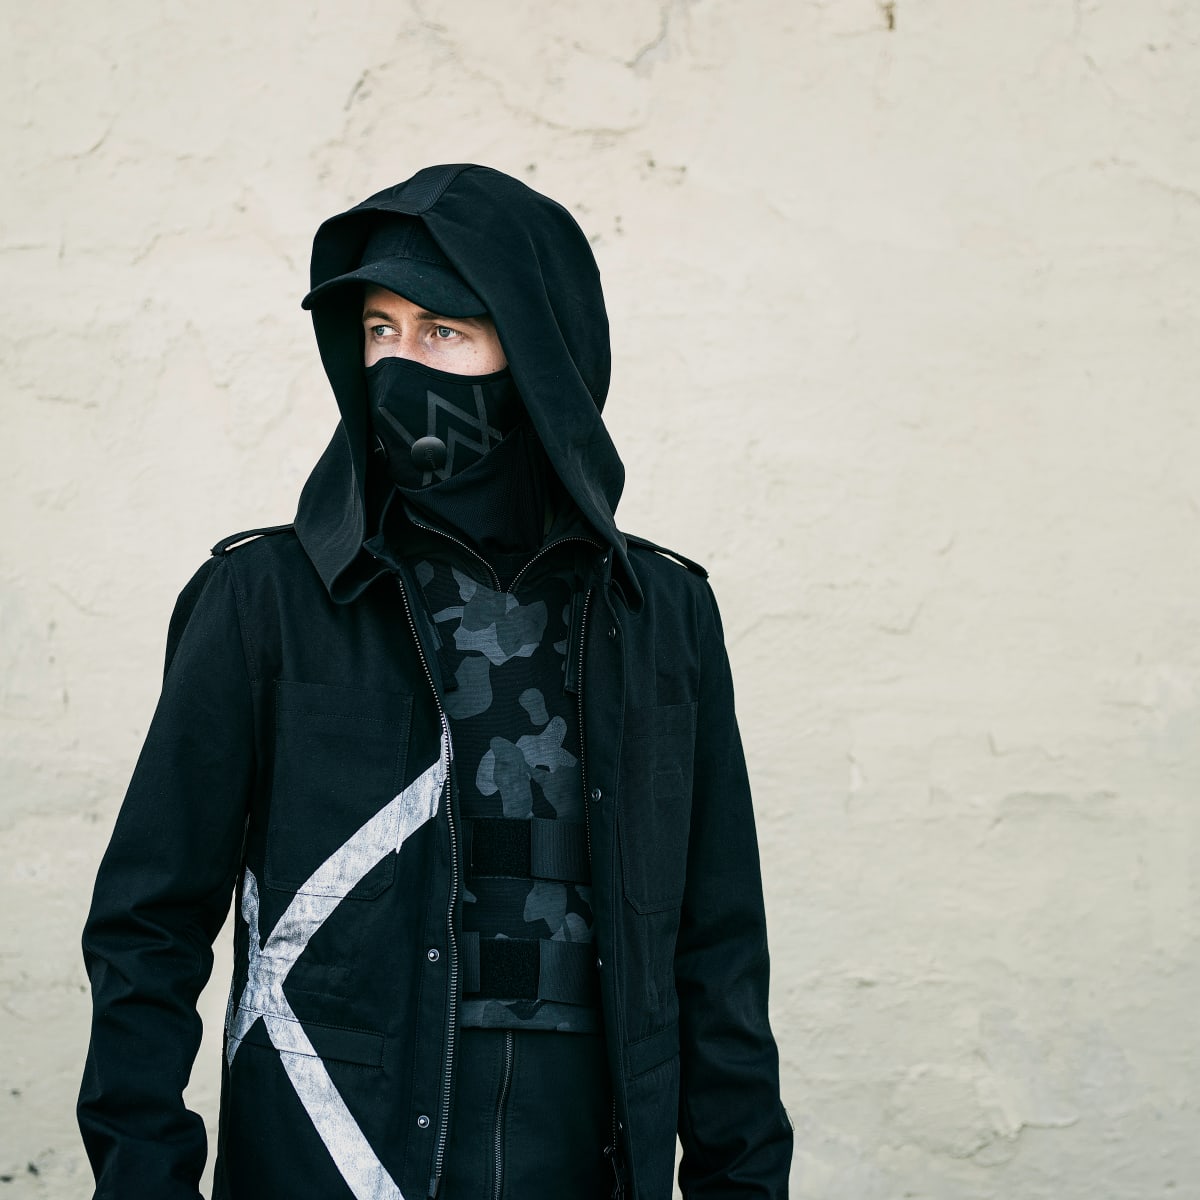 Alan Walker Launches New Gameplay Challenge To Find Next Music Video -  Edm.Com - The Latest Electronic Dance Music News, Reviews & Artists